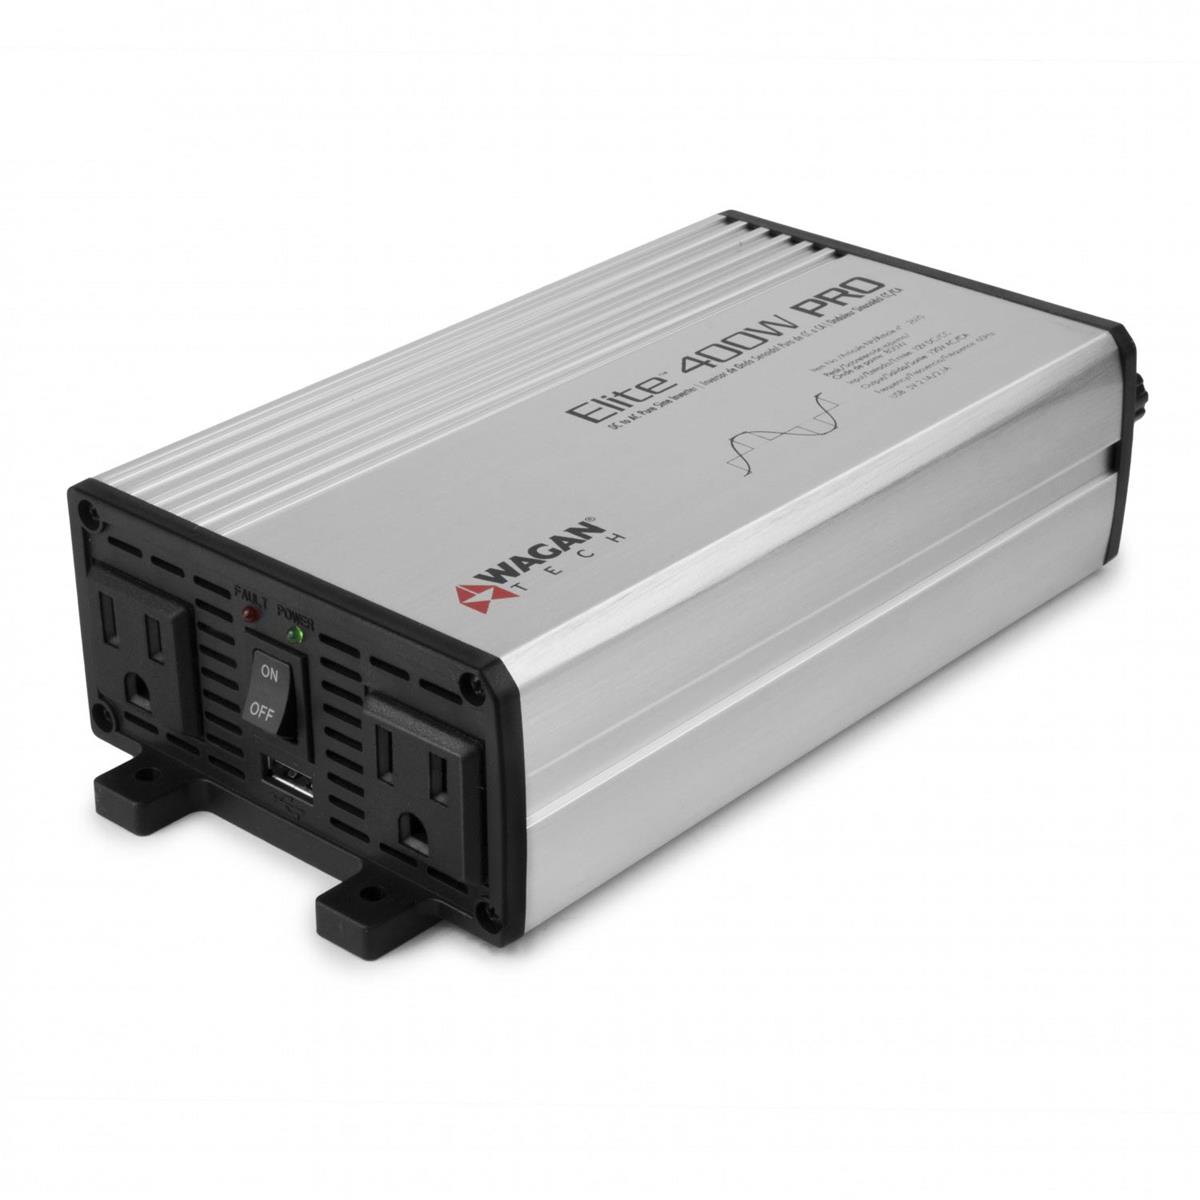 Image of Wagan Elite 400W Pro Pure Sine Wave DC to AC Power Inverter